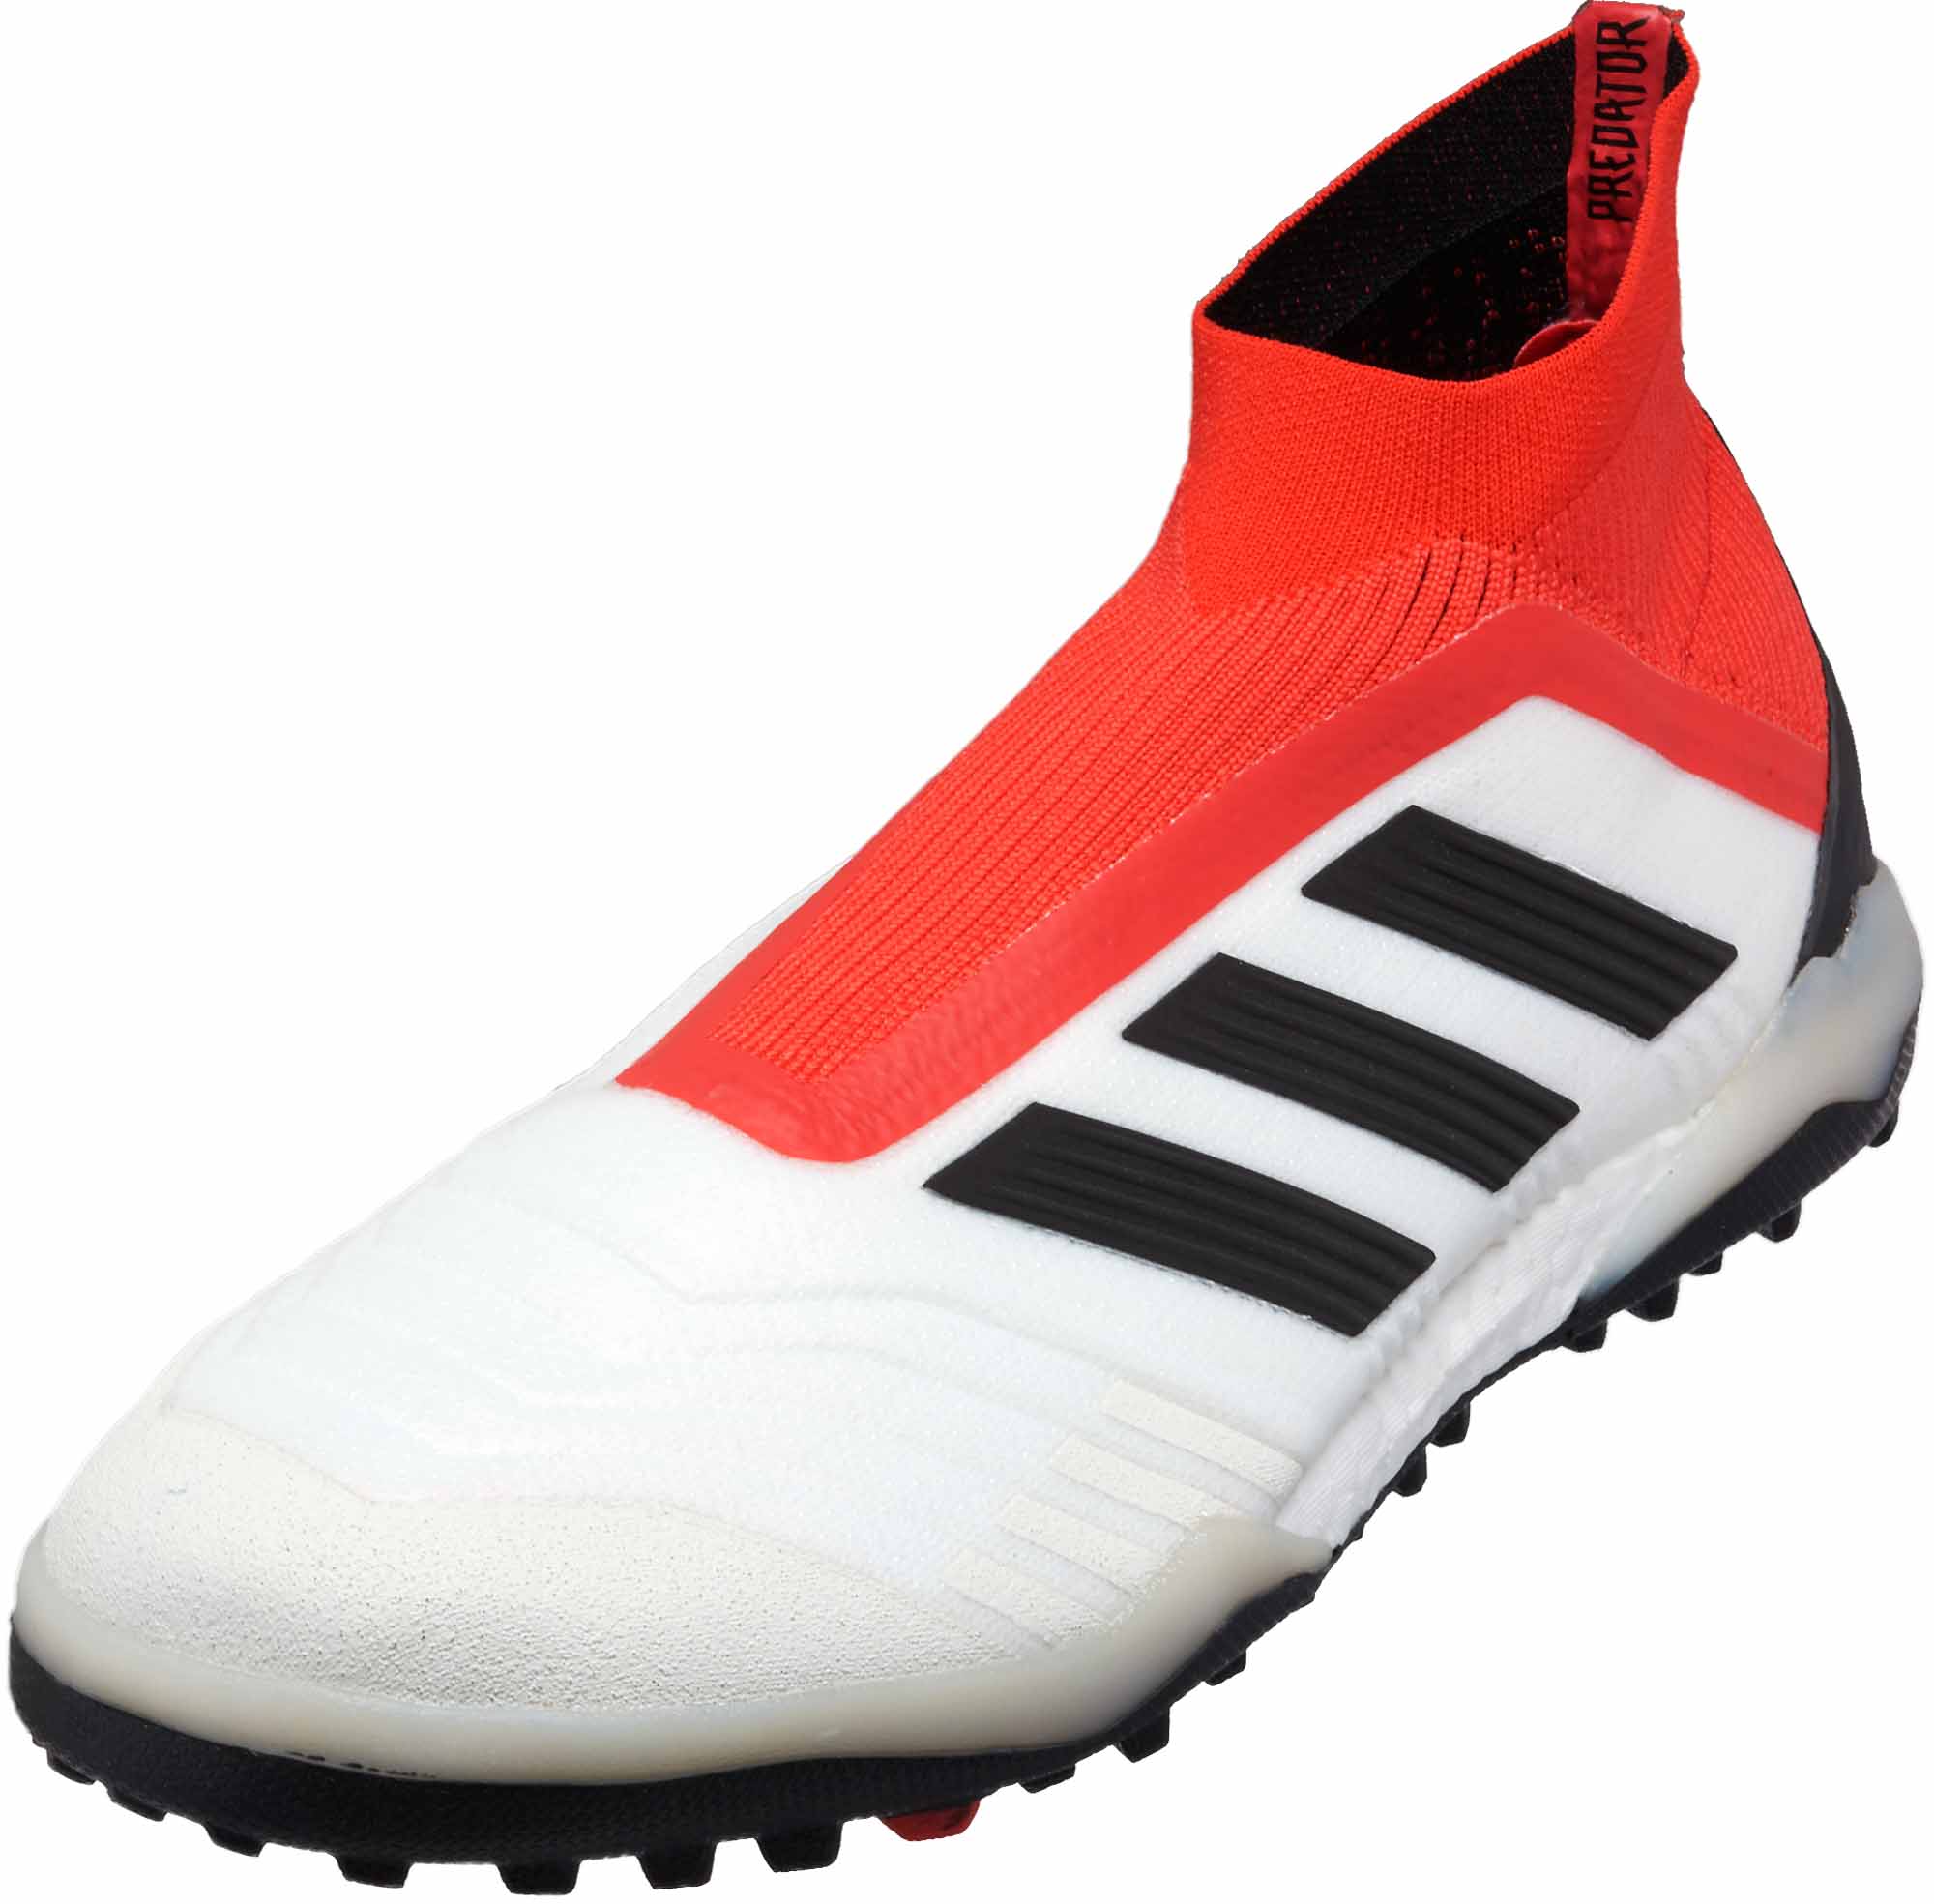 food Disagreement of course adidas Predator Tango 18 TF - Cold Blooded Pack